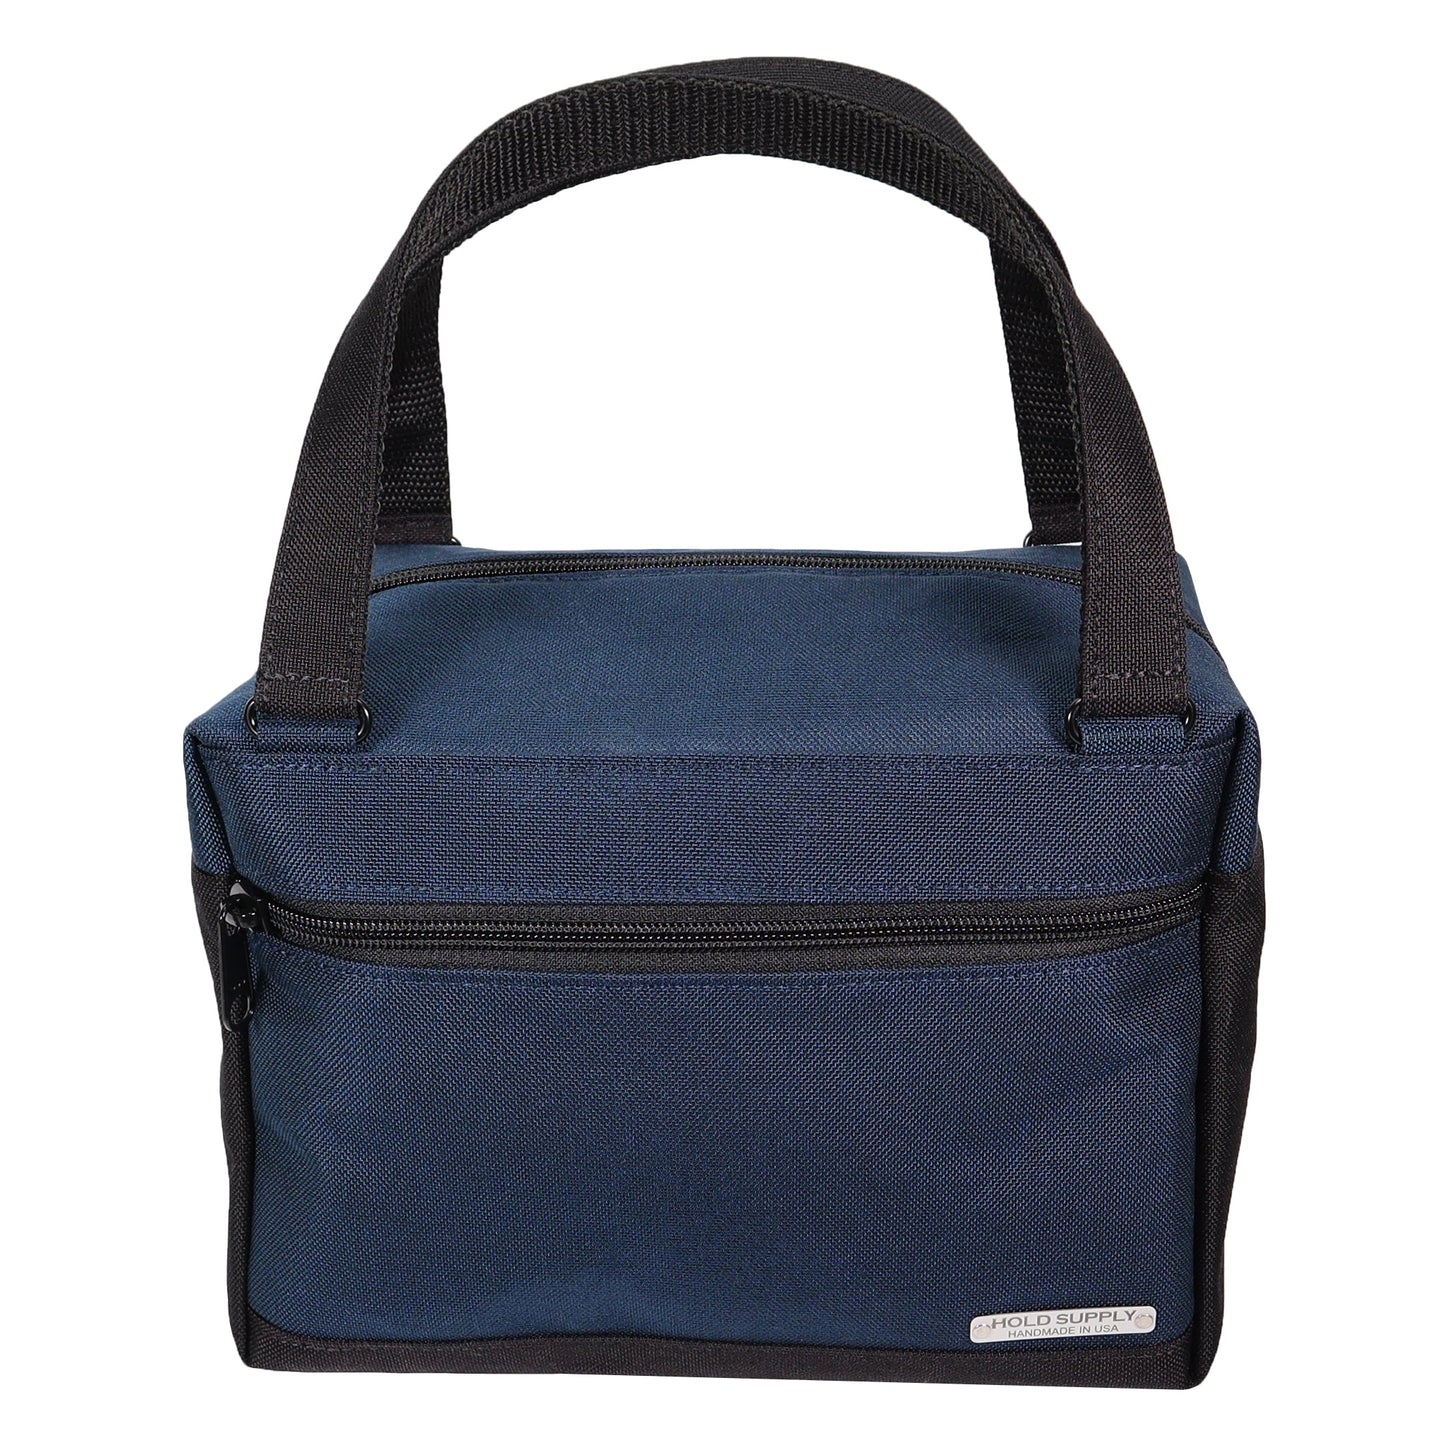 Navy Blue and Black Insulated Canvas Zippered Lunch Bag